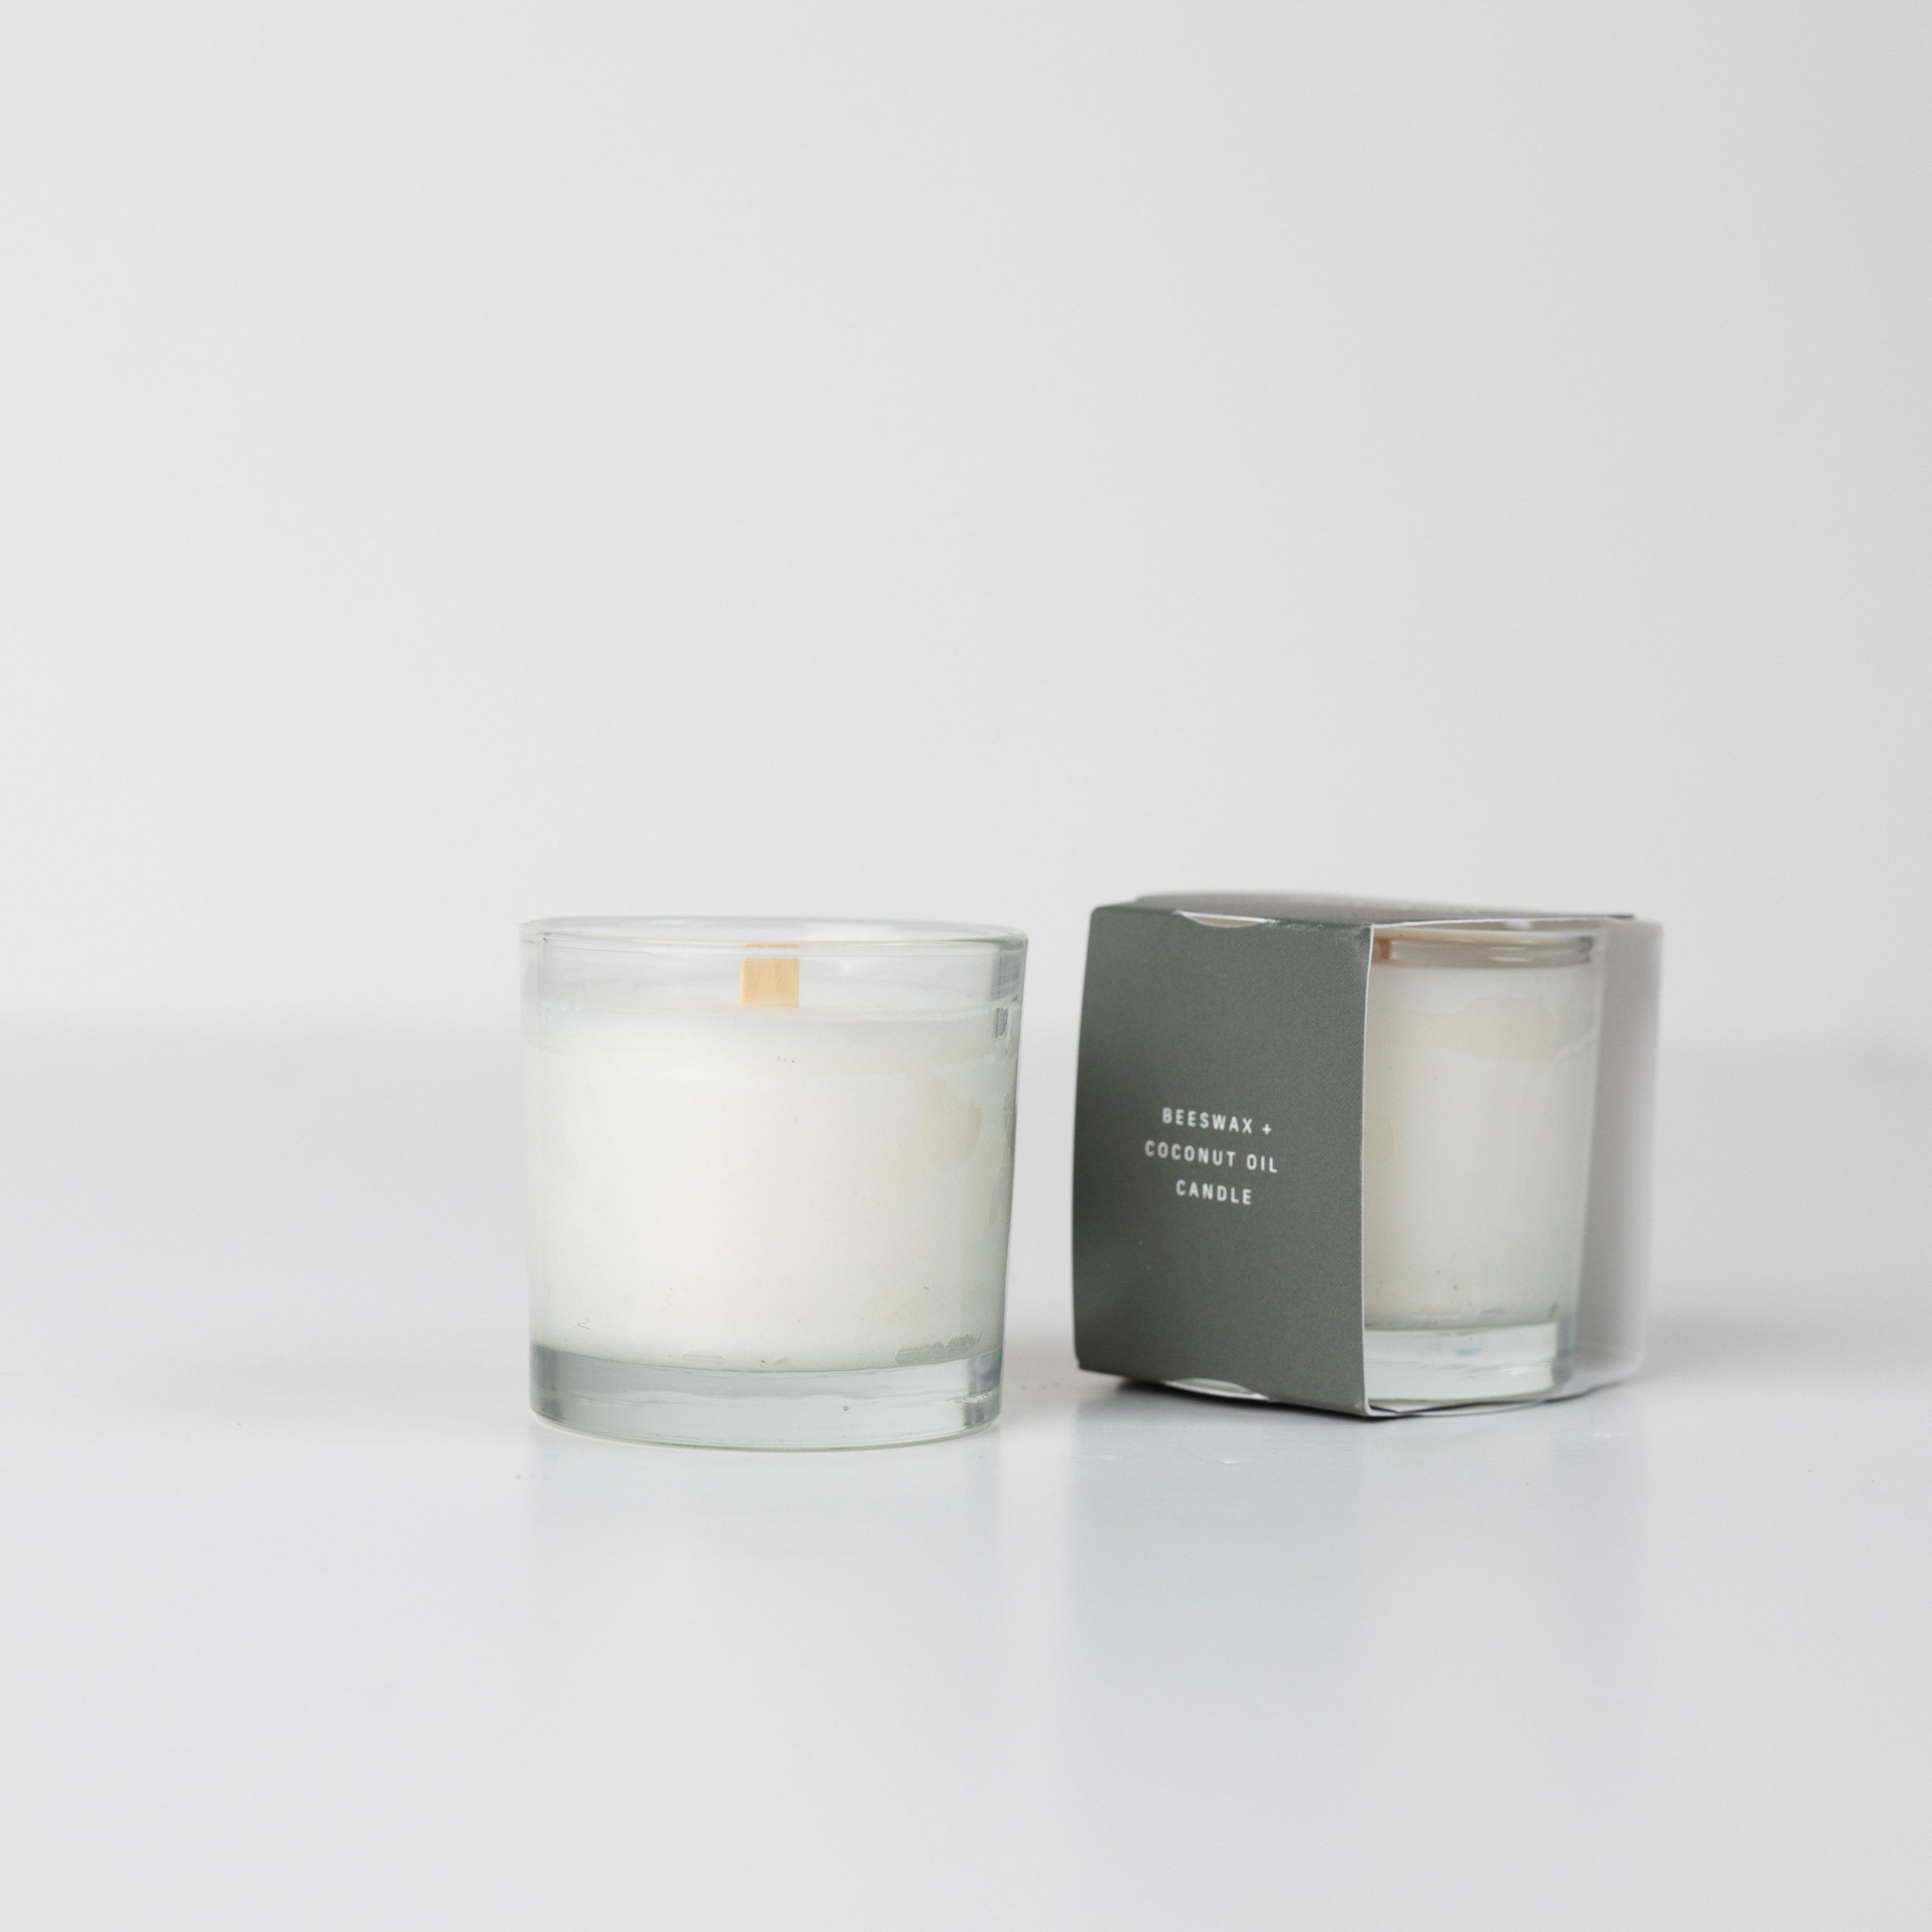 The Mini Candle Collection